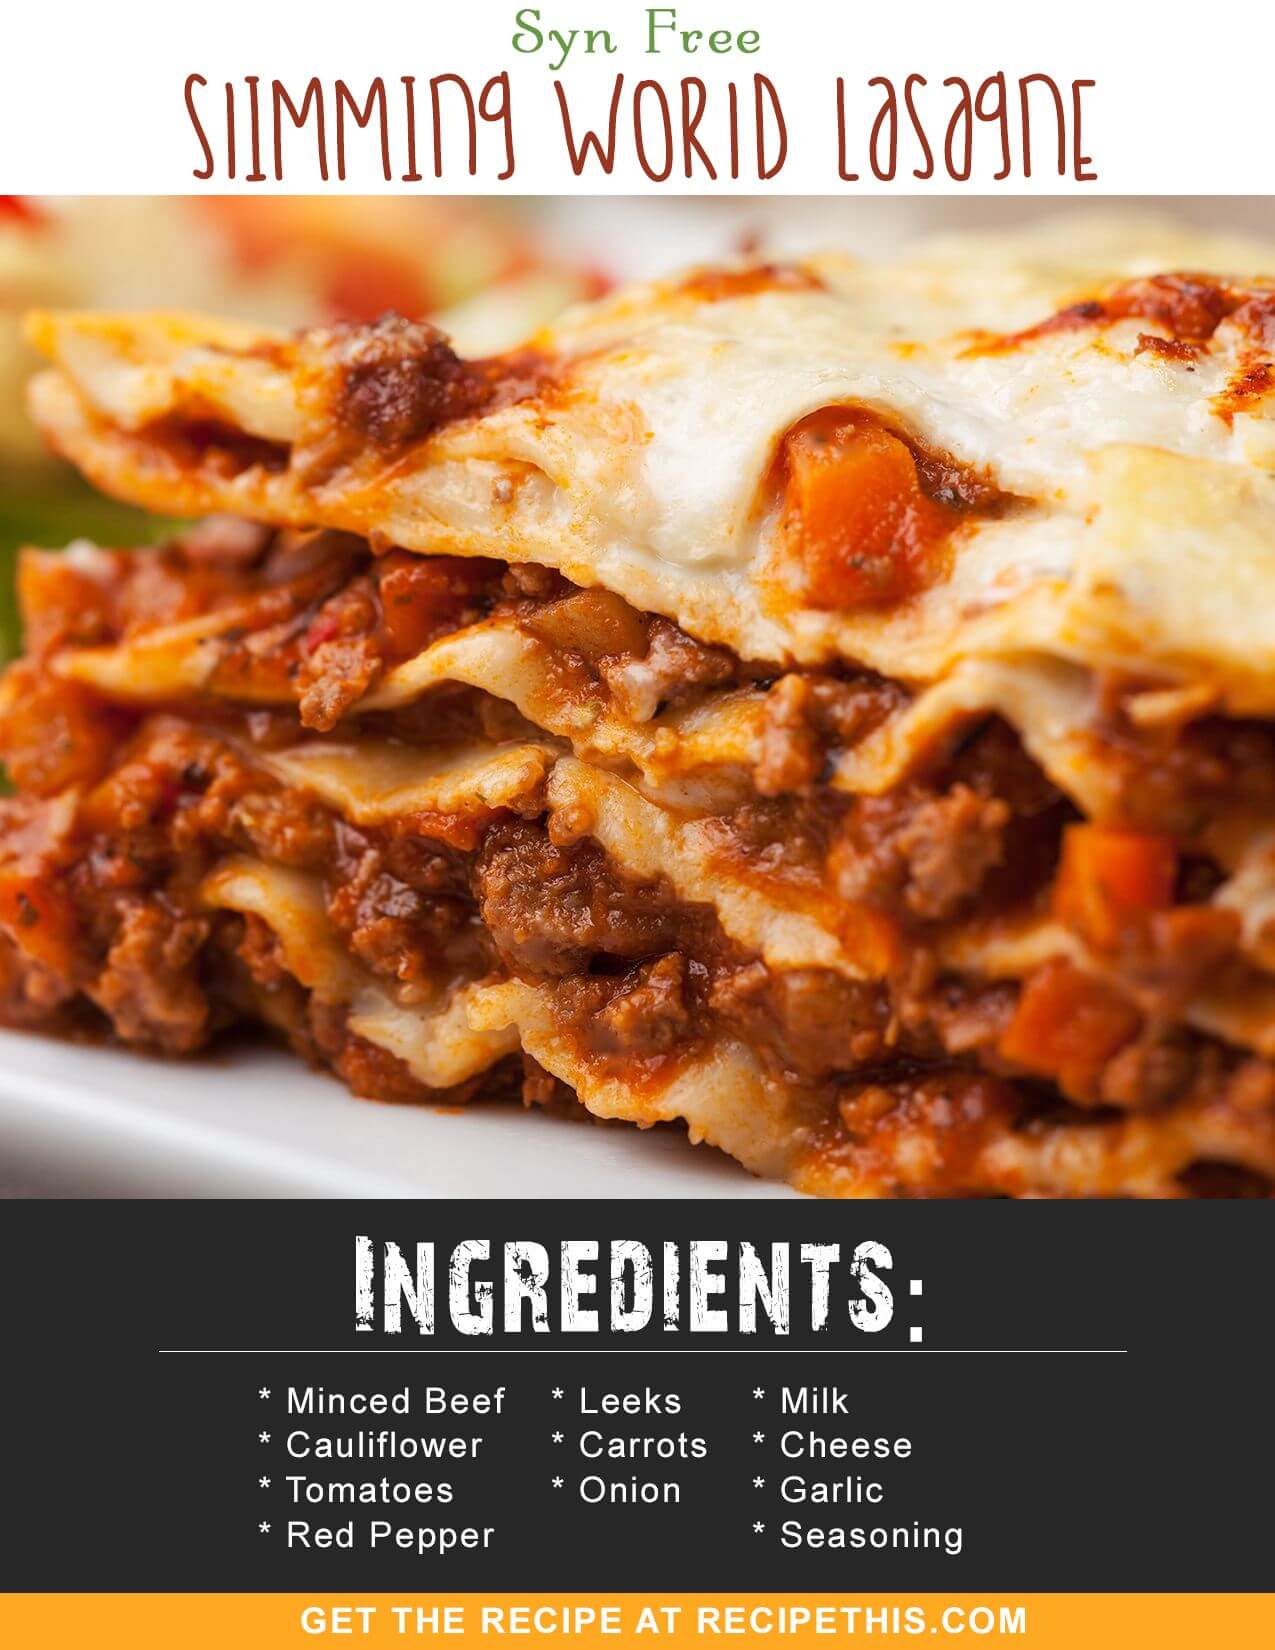 Slimming World Recipes | Syn Free Slimming World Lasagne Recipe from RecipeThis.com